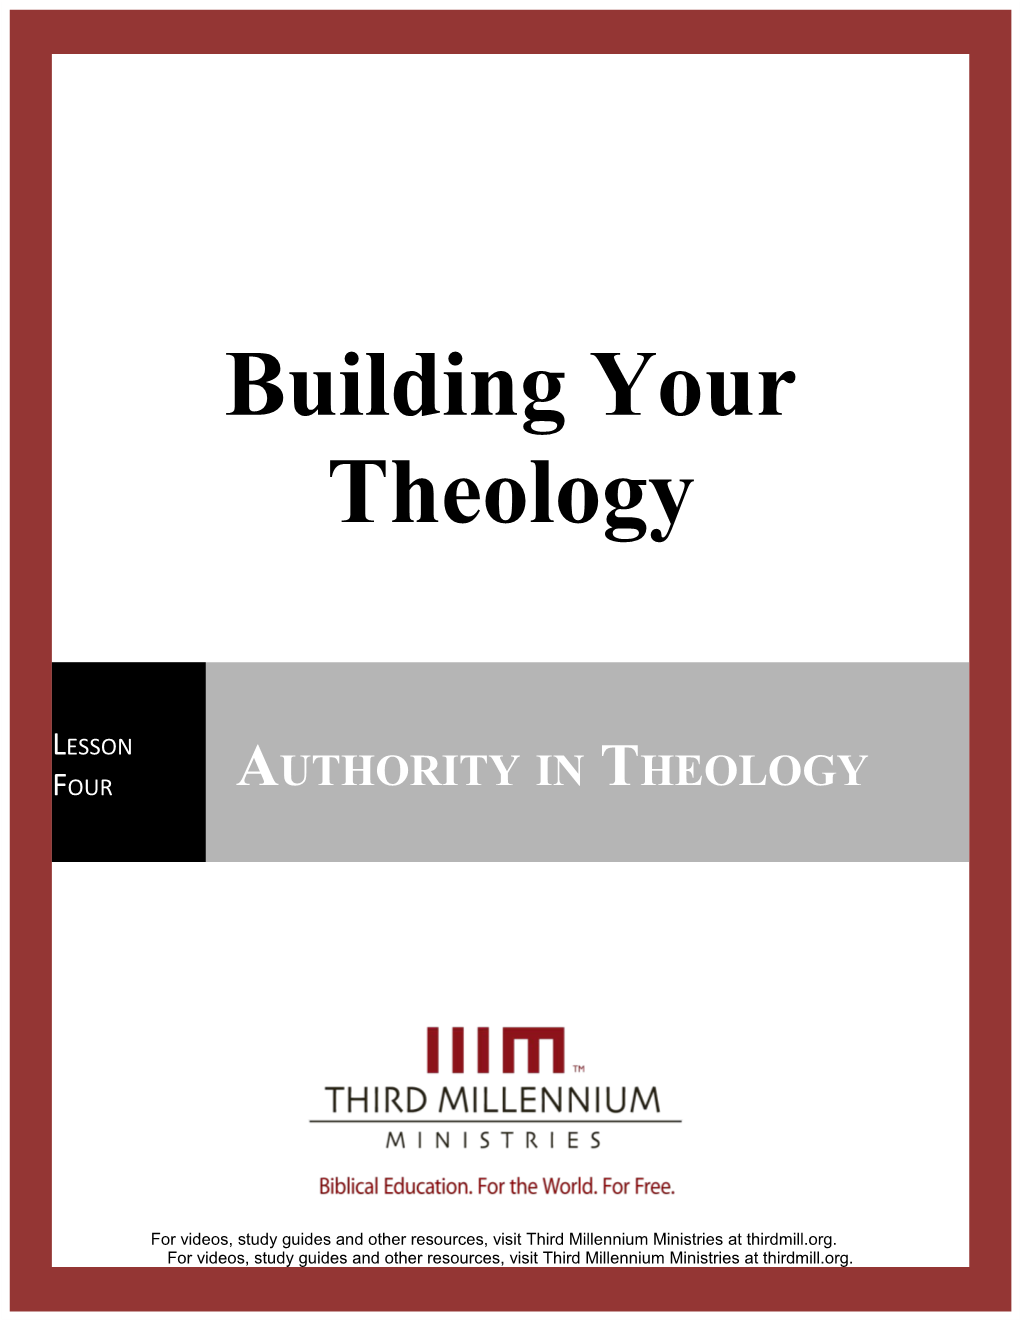 Building Your Theology, Lesson 4